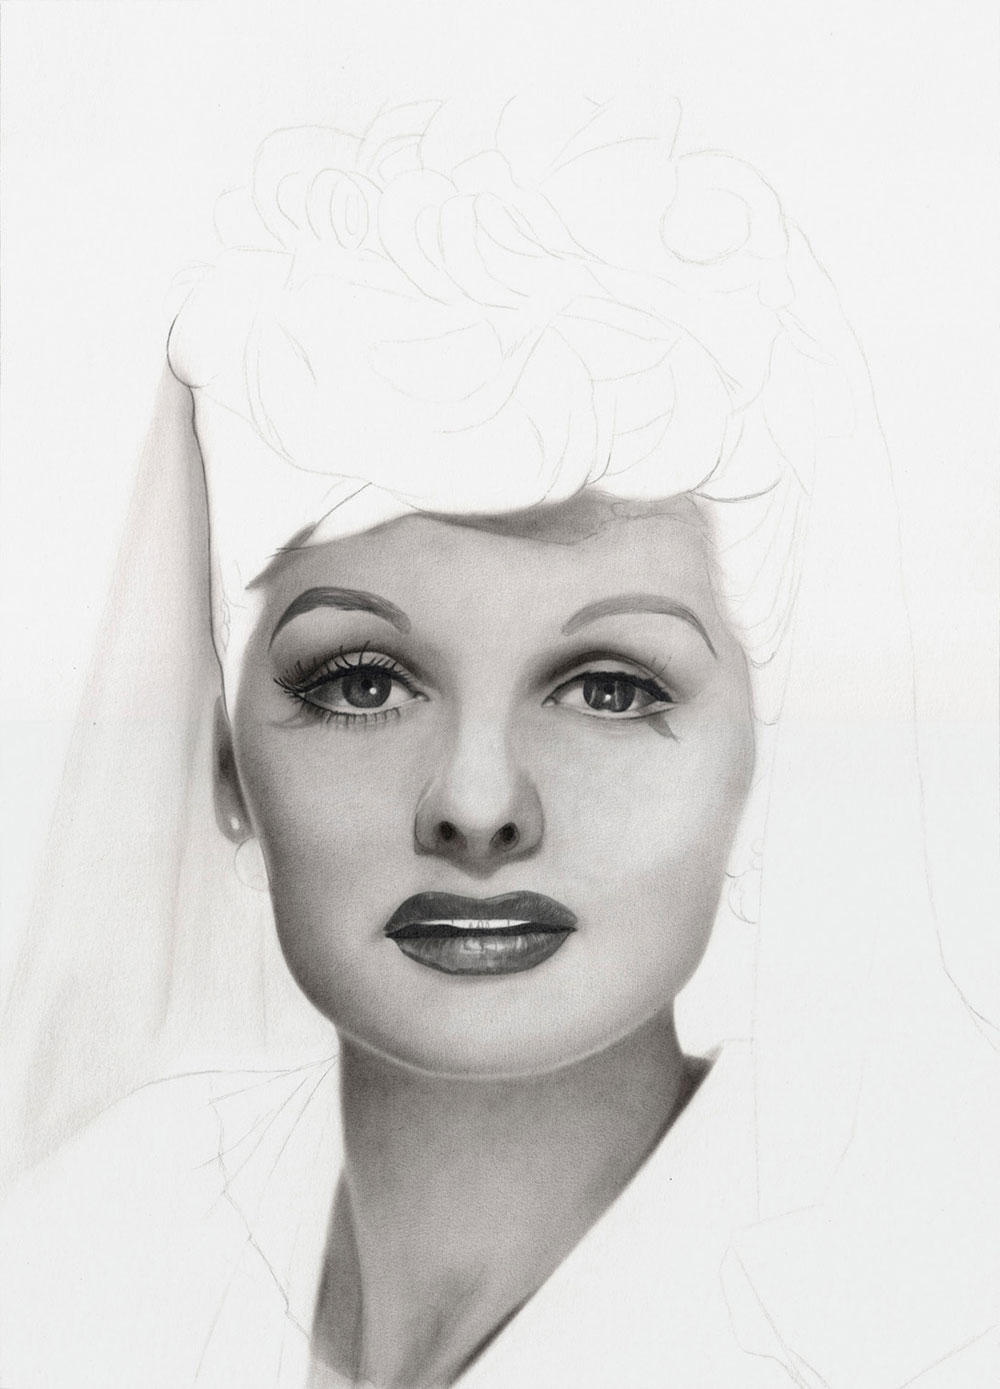 Graphite Pencil Drawing Techniques - Pencil Drawings Drawing Graphite ...